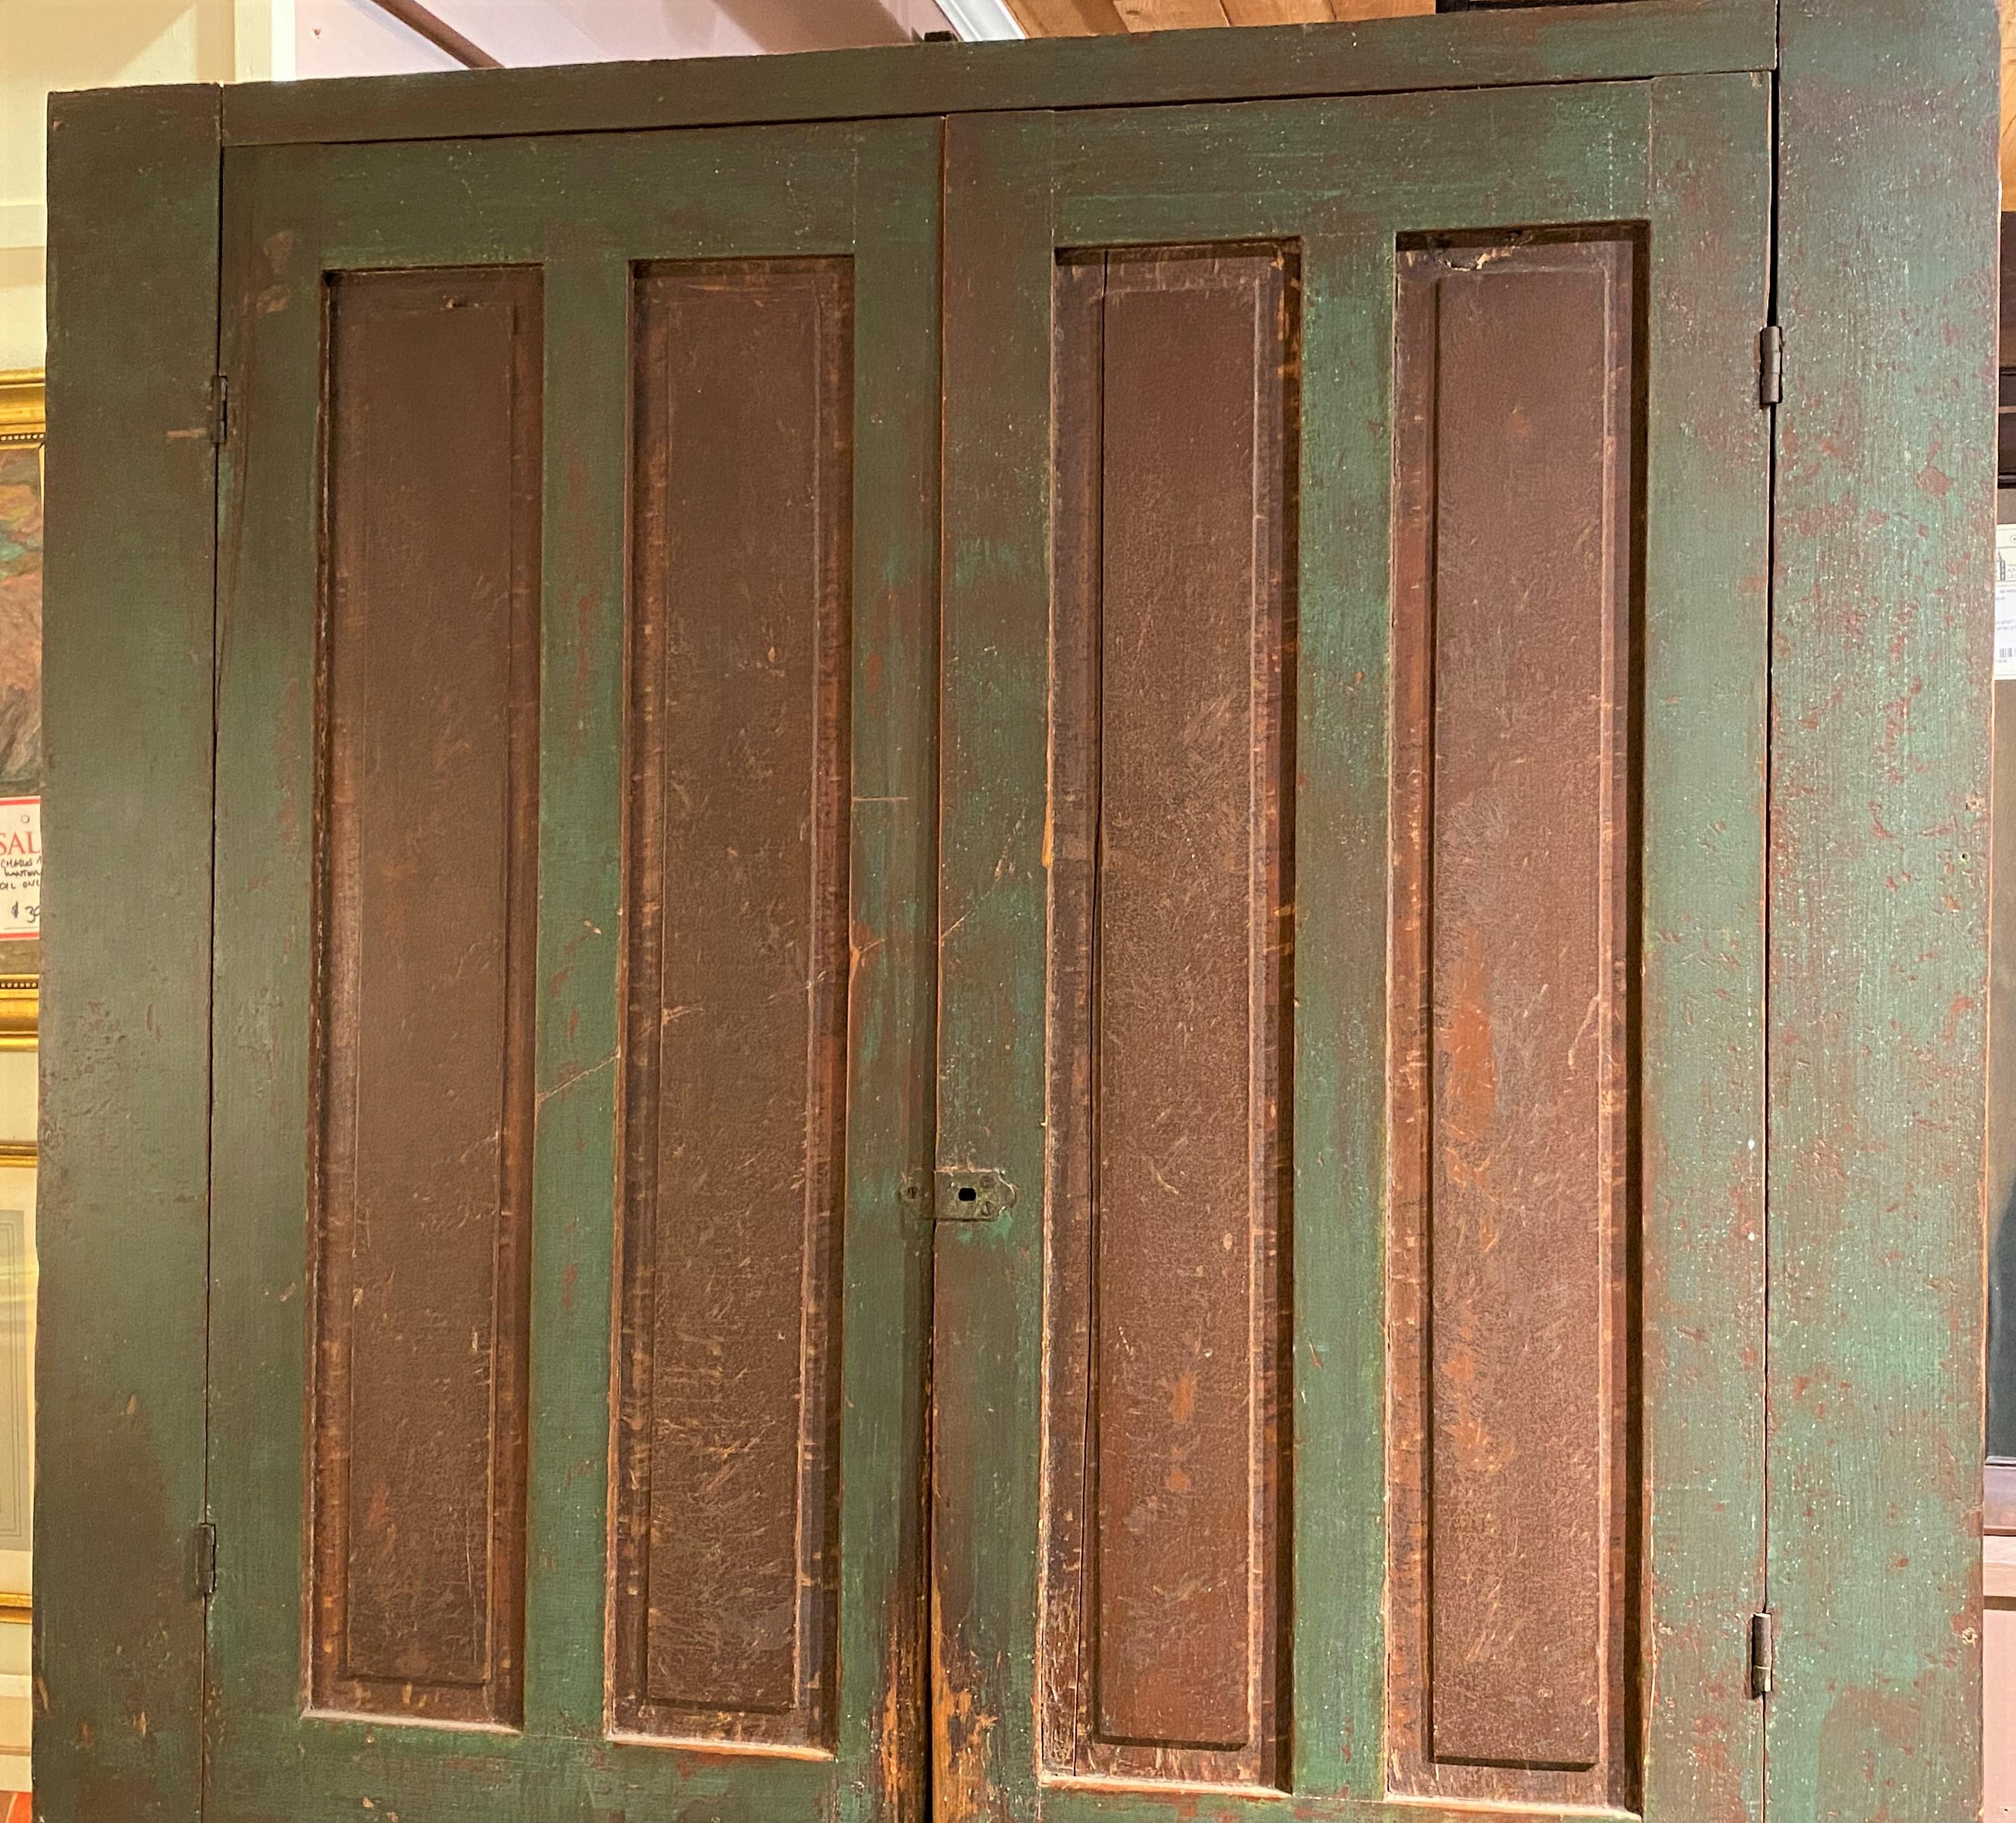 A wonderful large New England pine four door cupboard with double panels on each door, opening to four interior shelves, in old green paint with reddish brown panel highlights and nicely carved skirt at the base. The cupboard dates to the early 19th